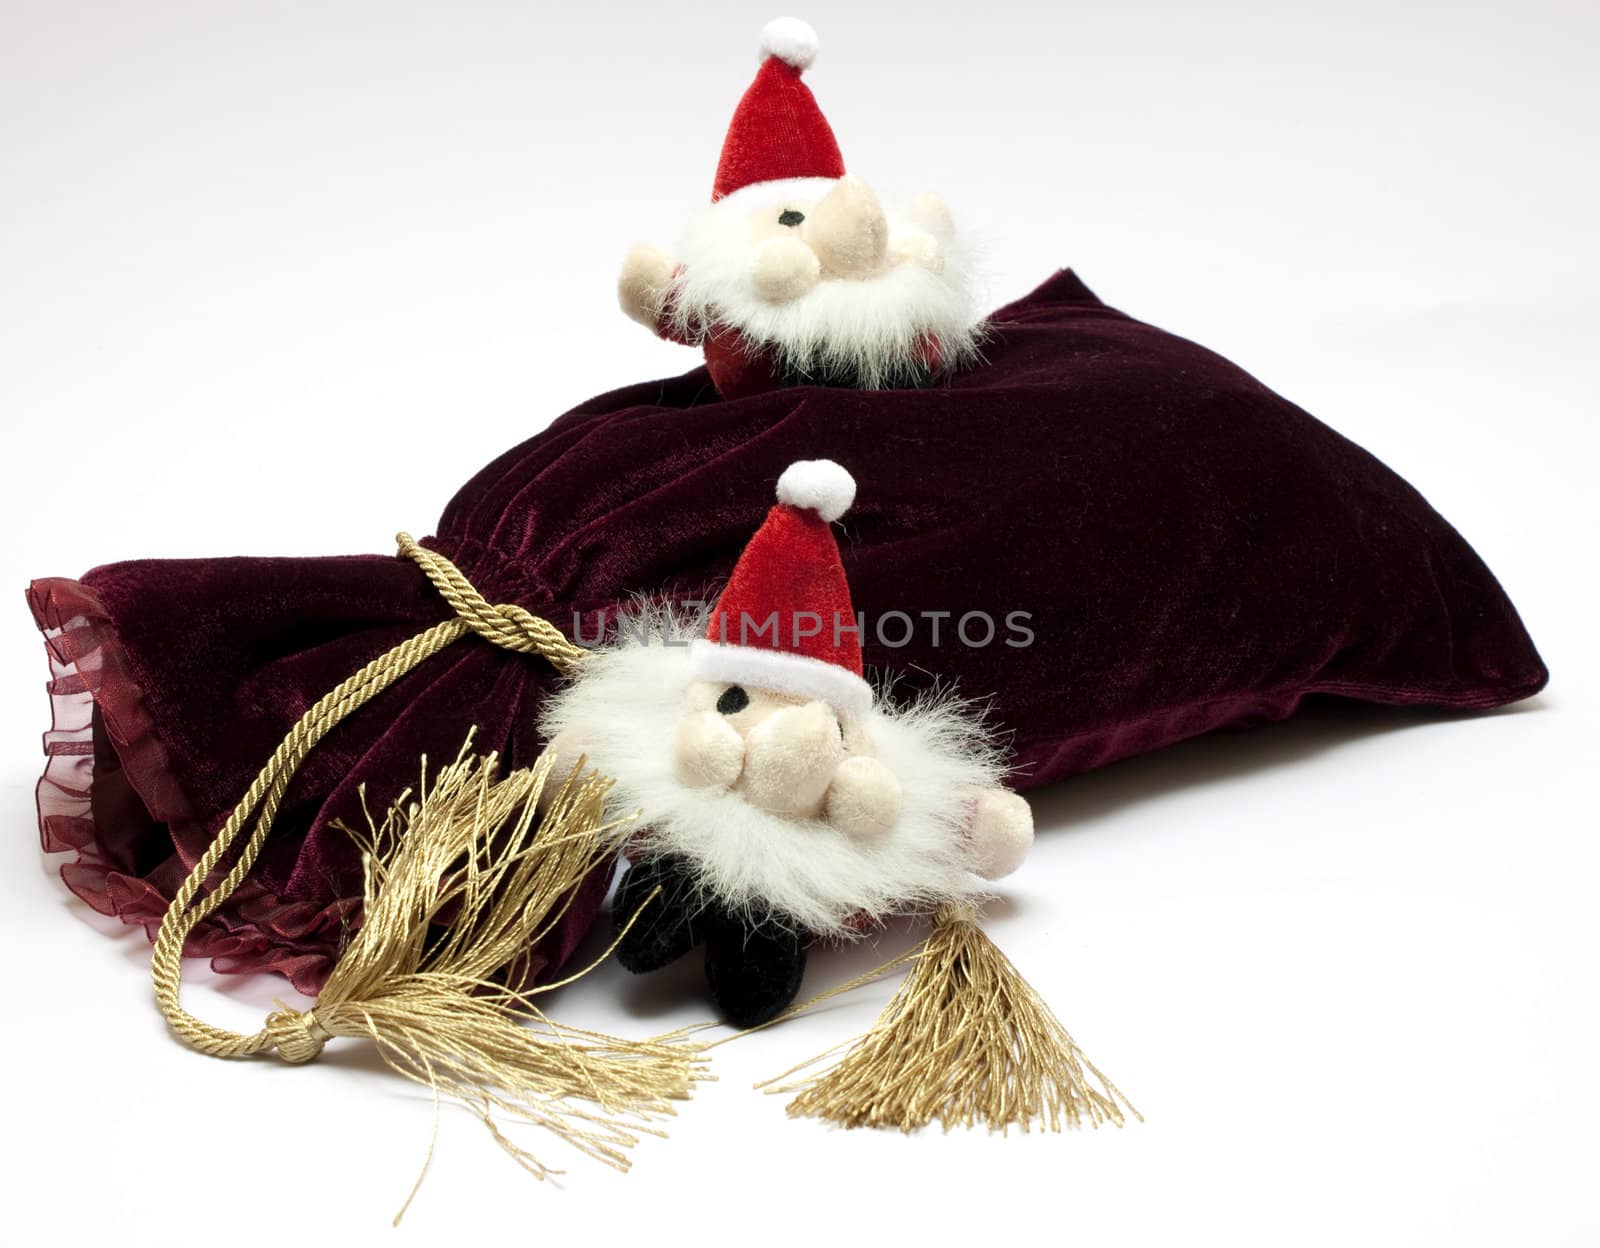 anta Claus toy and fancy luxury gift bag by Arsen